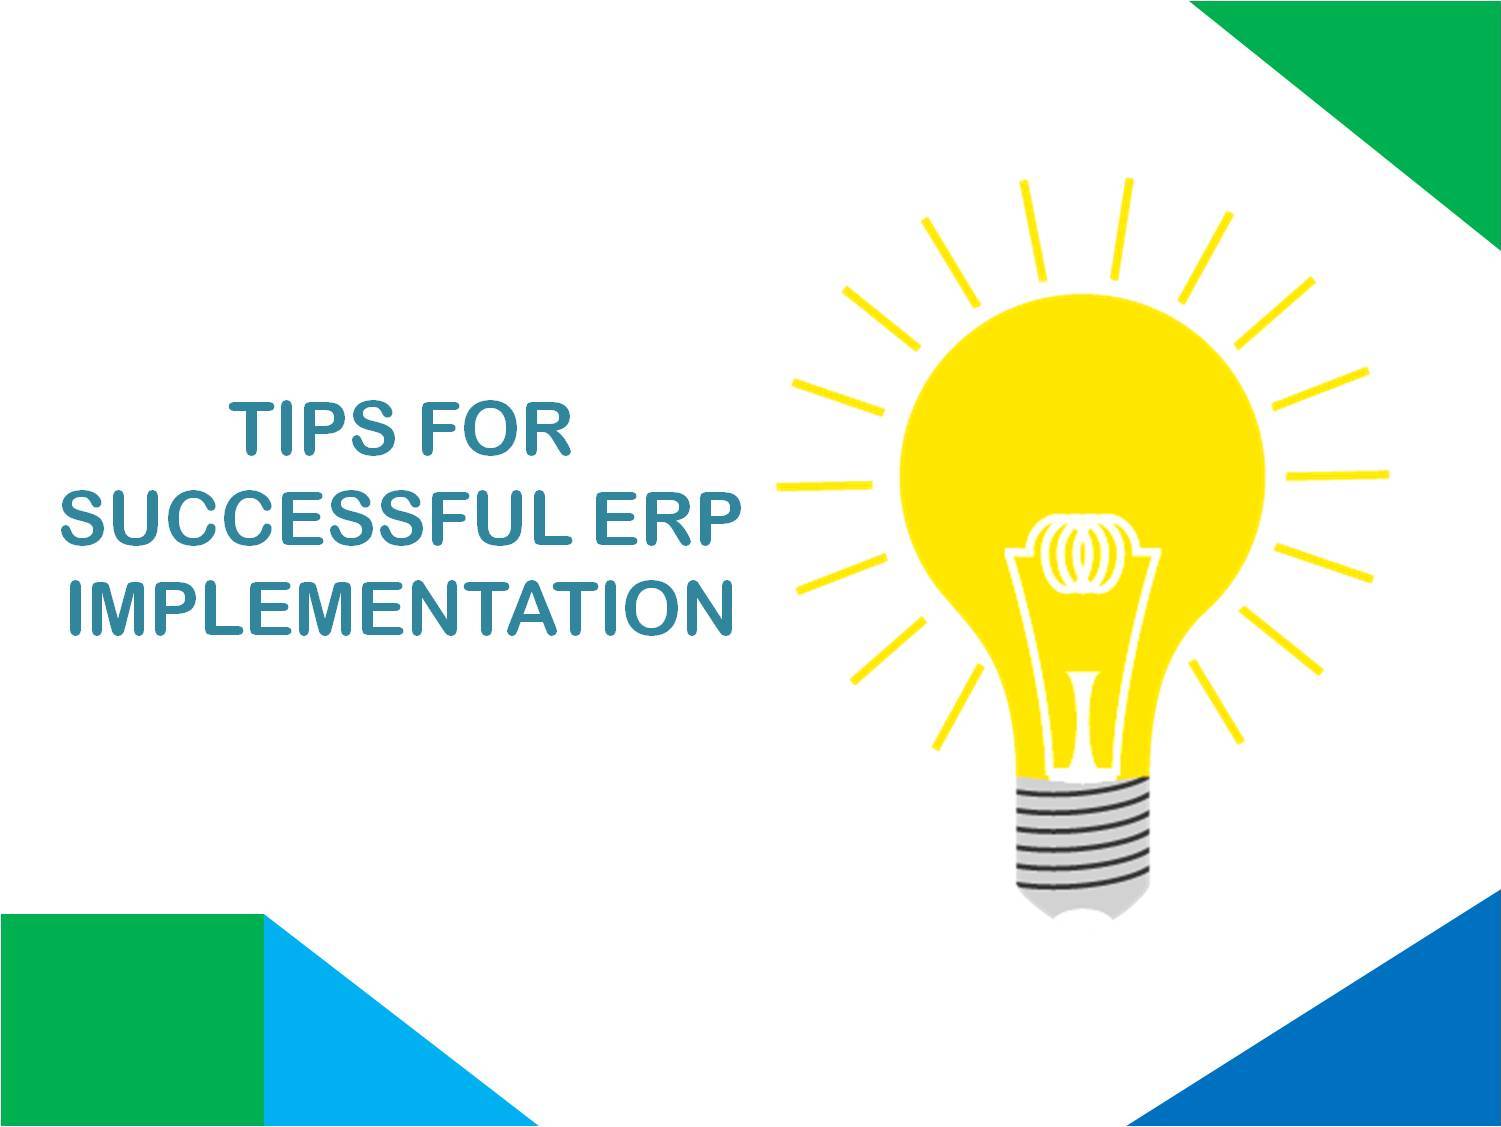 10 tips for successful erp implementation